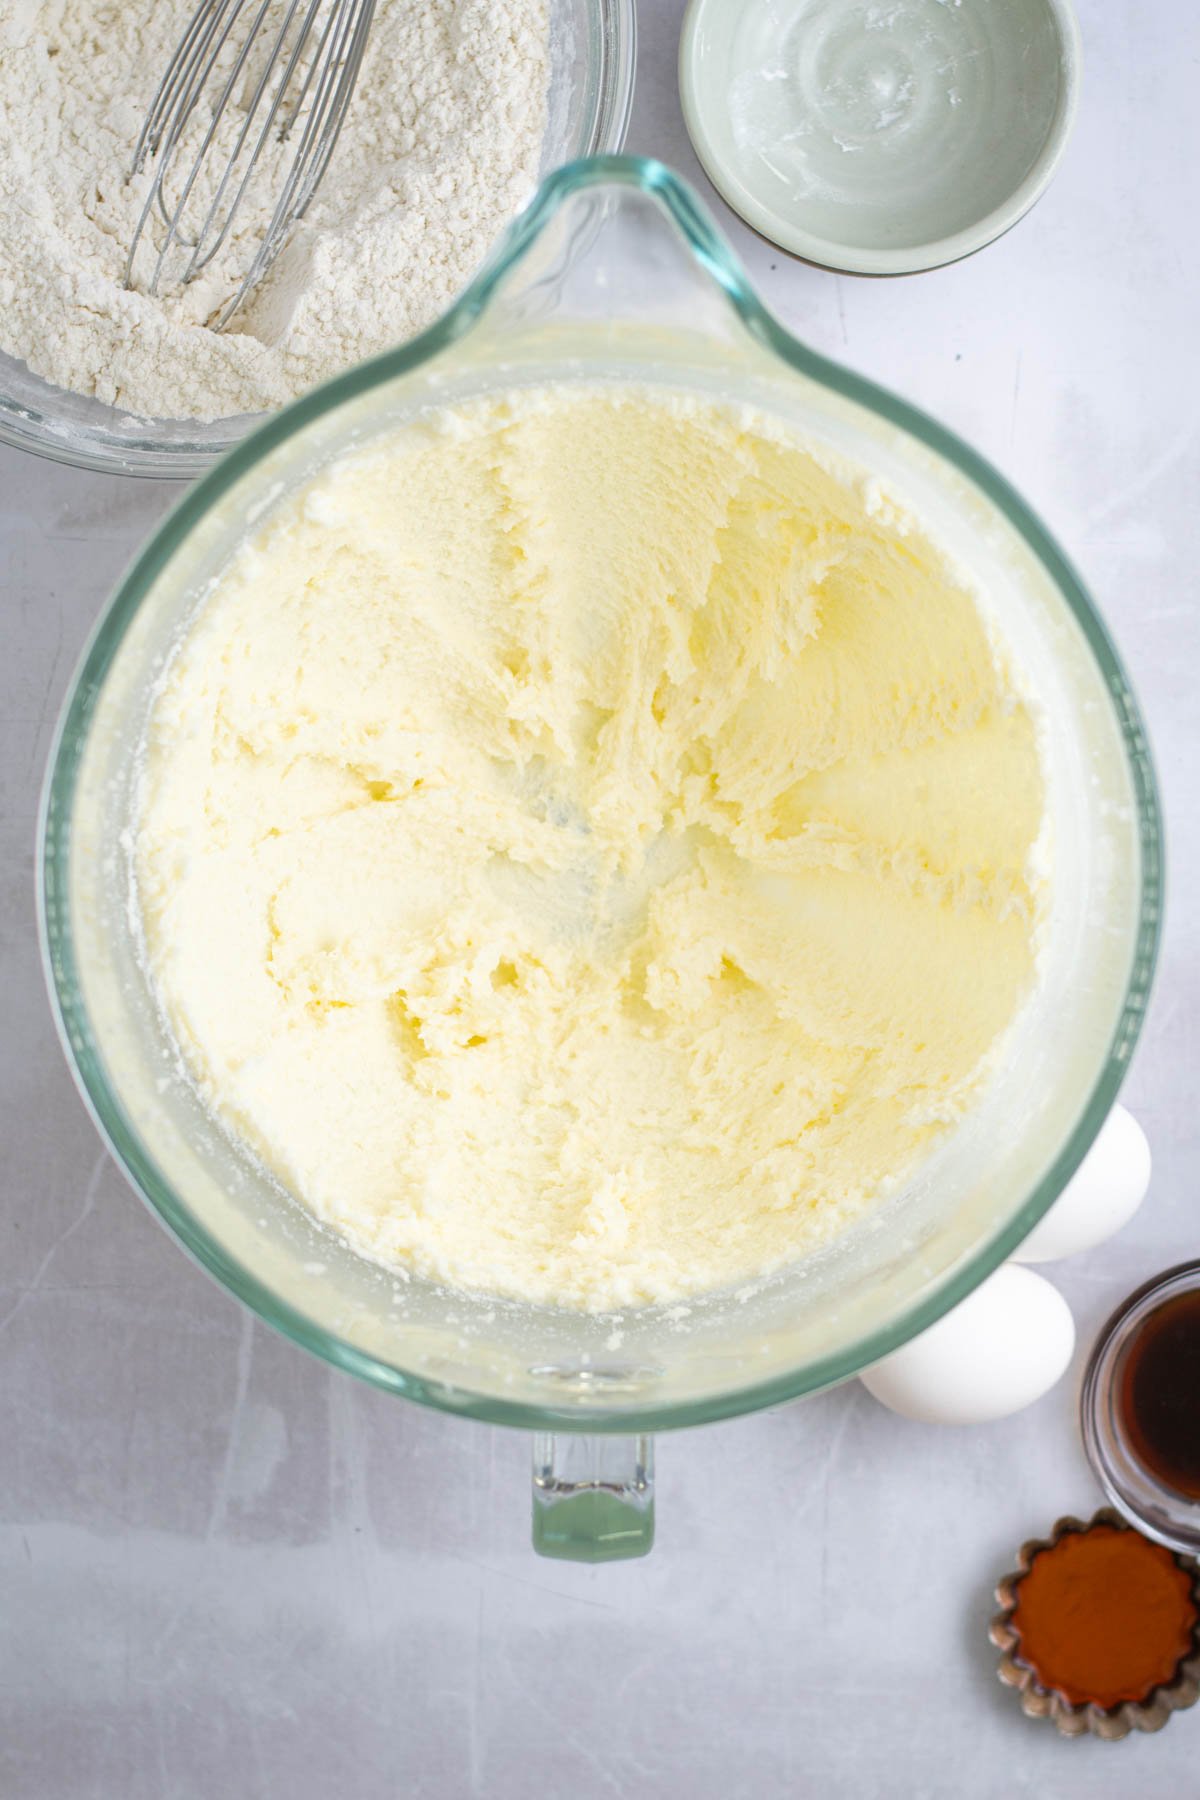 butter, sugar and oil beat together in a mixing bowl